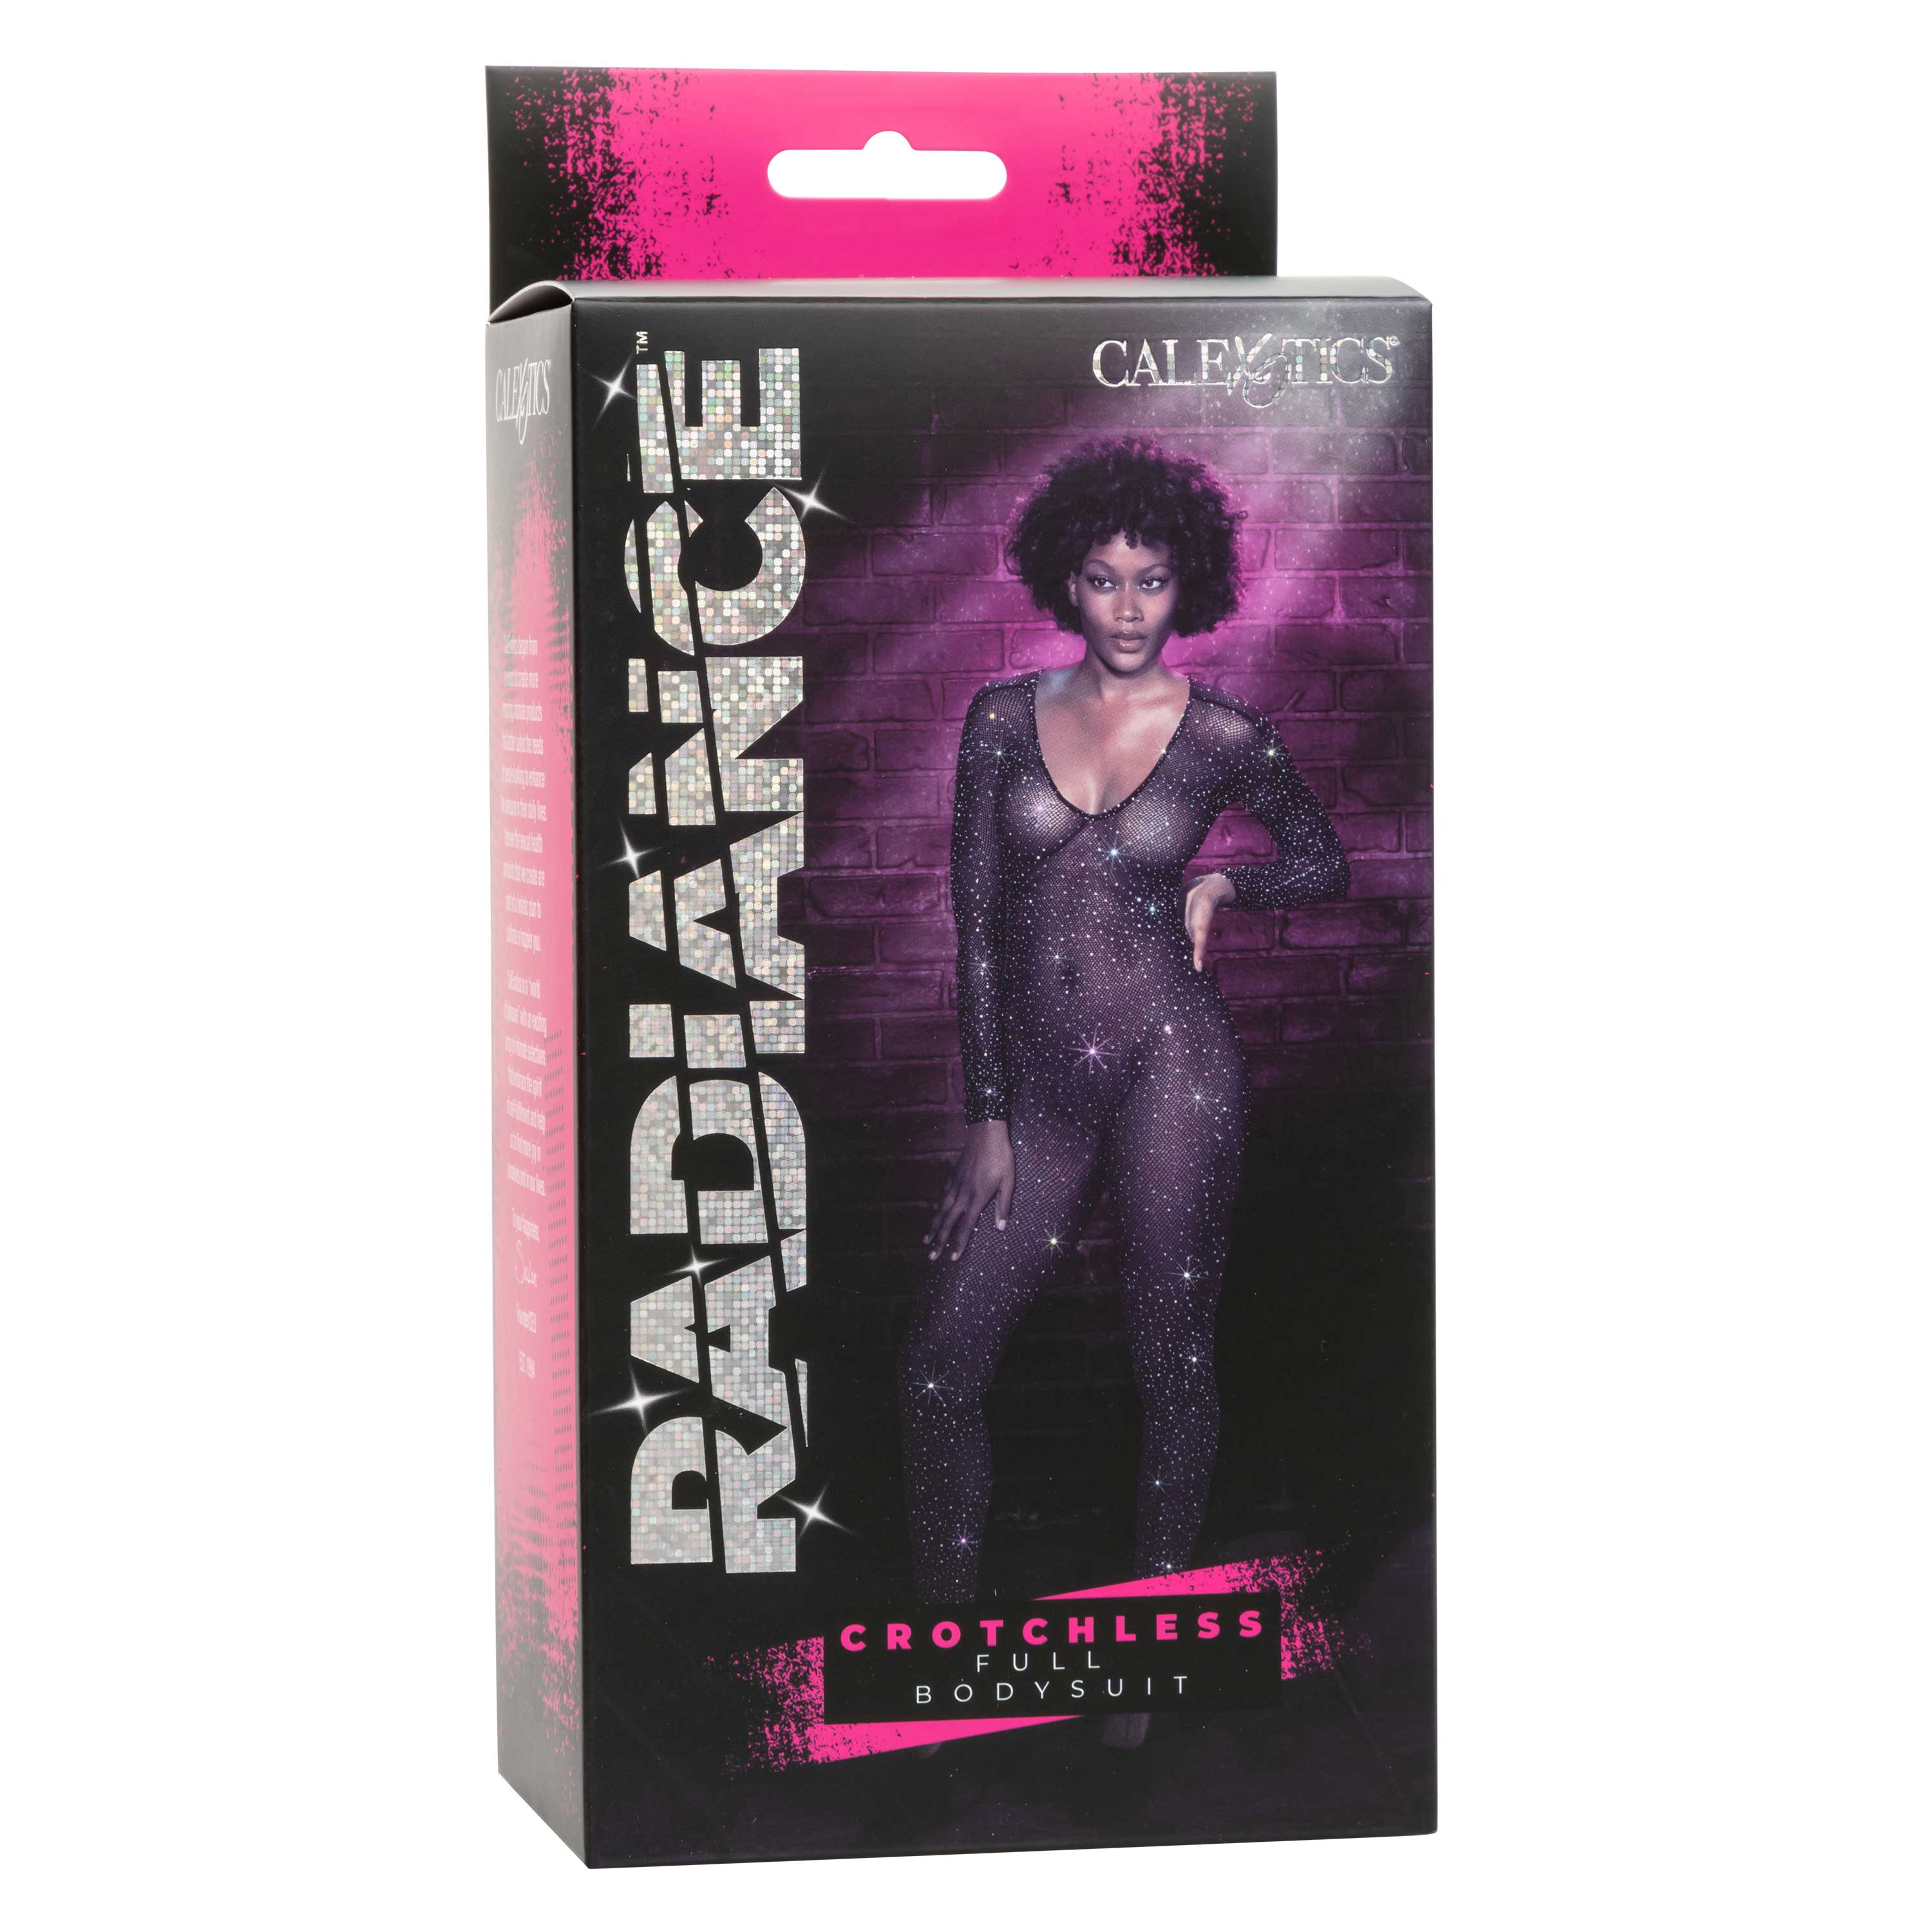 Radiance Crotchless Full Body Suit - One Size -  Black-3